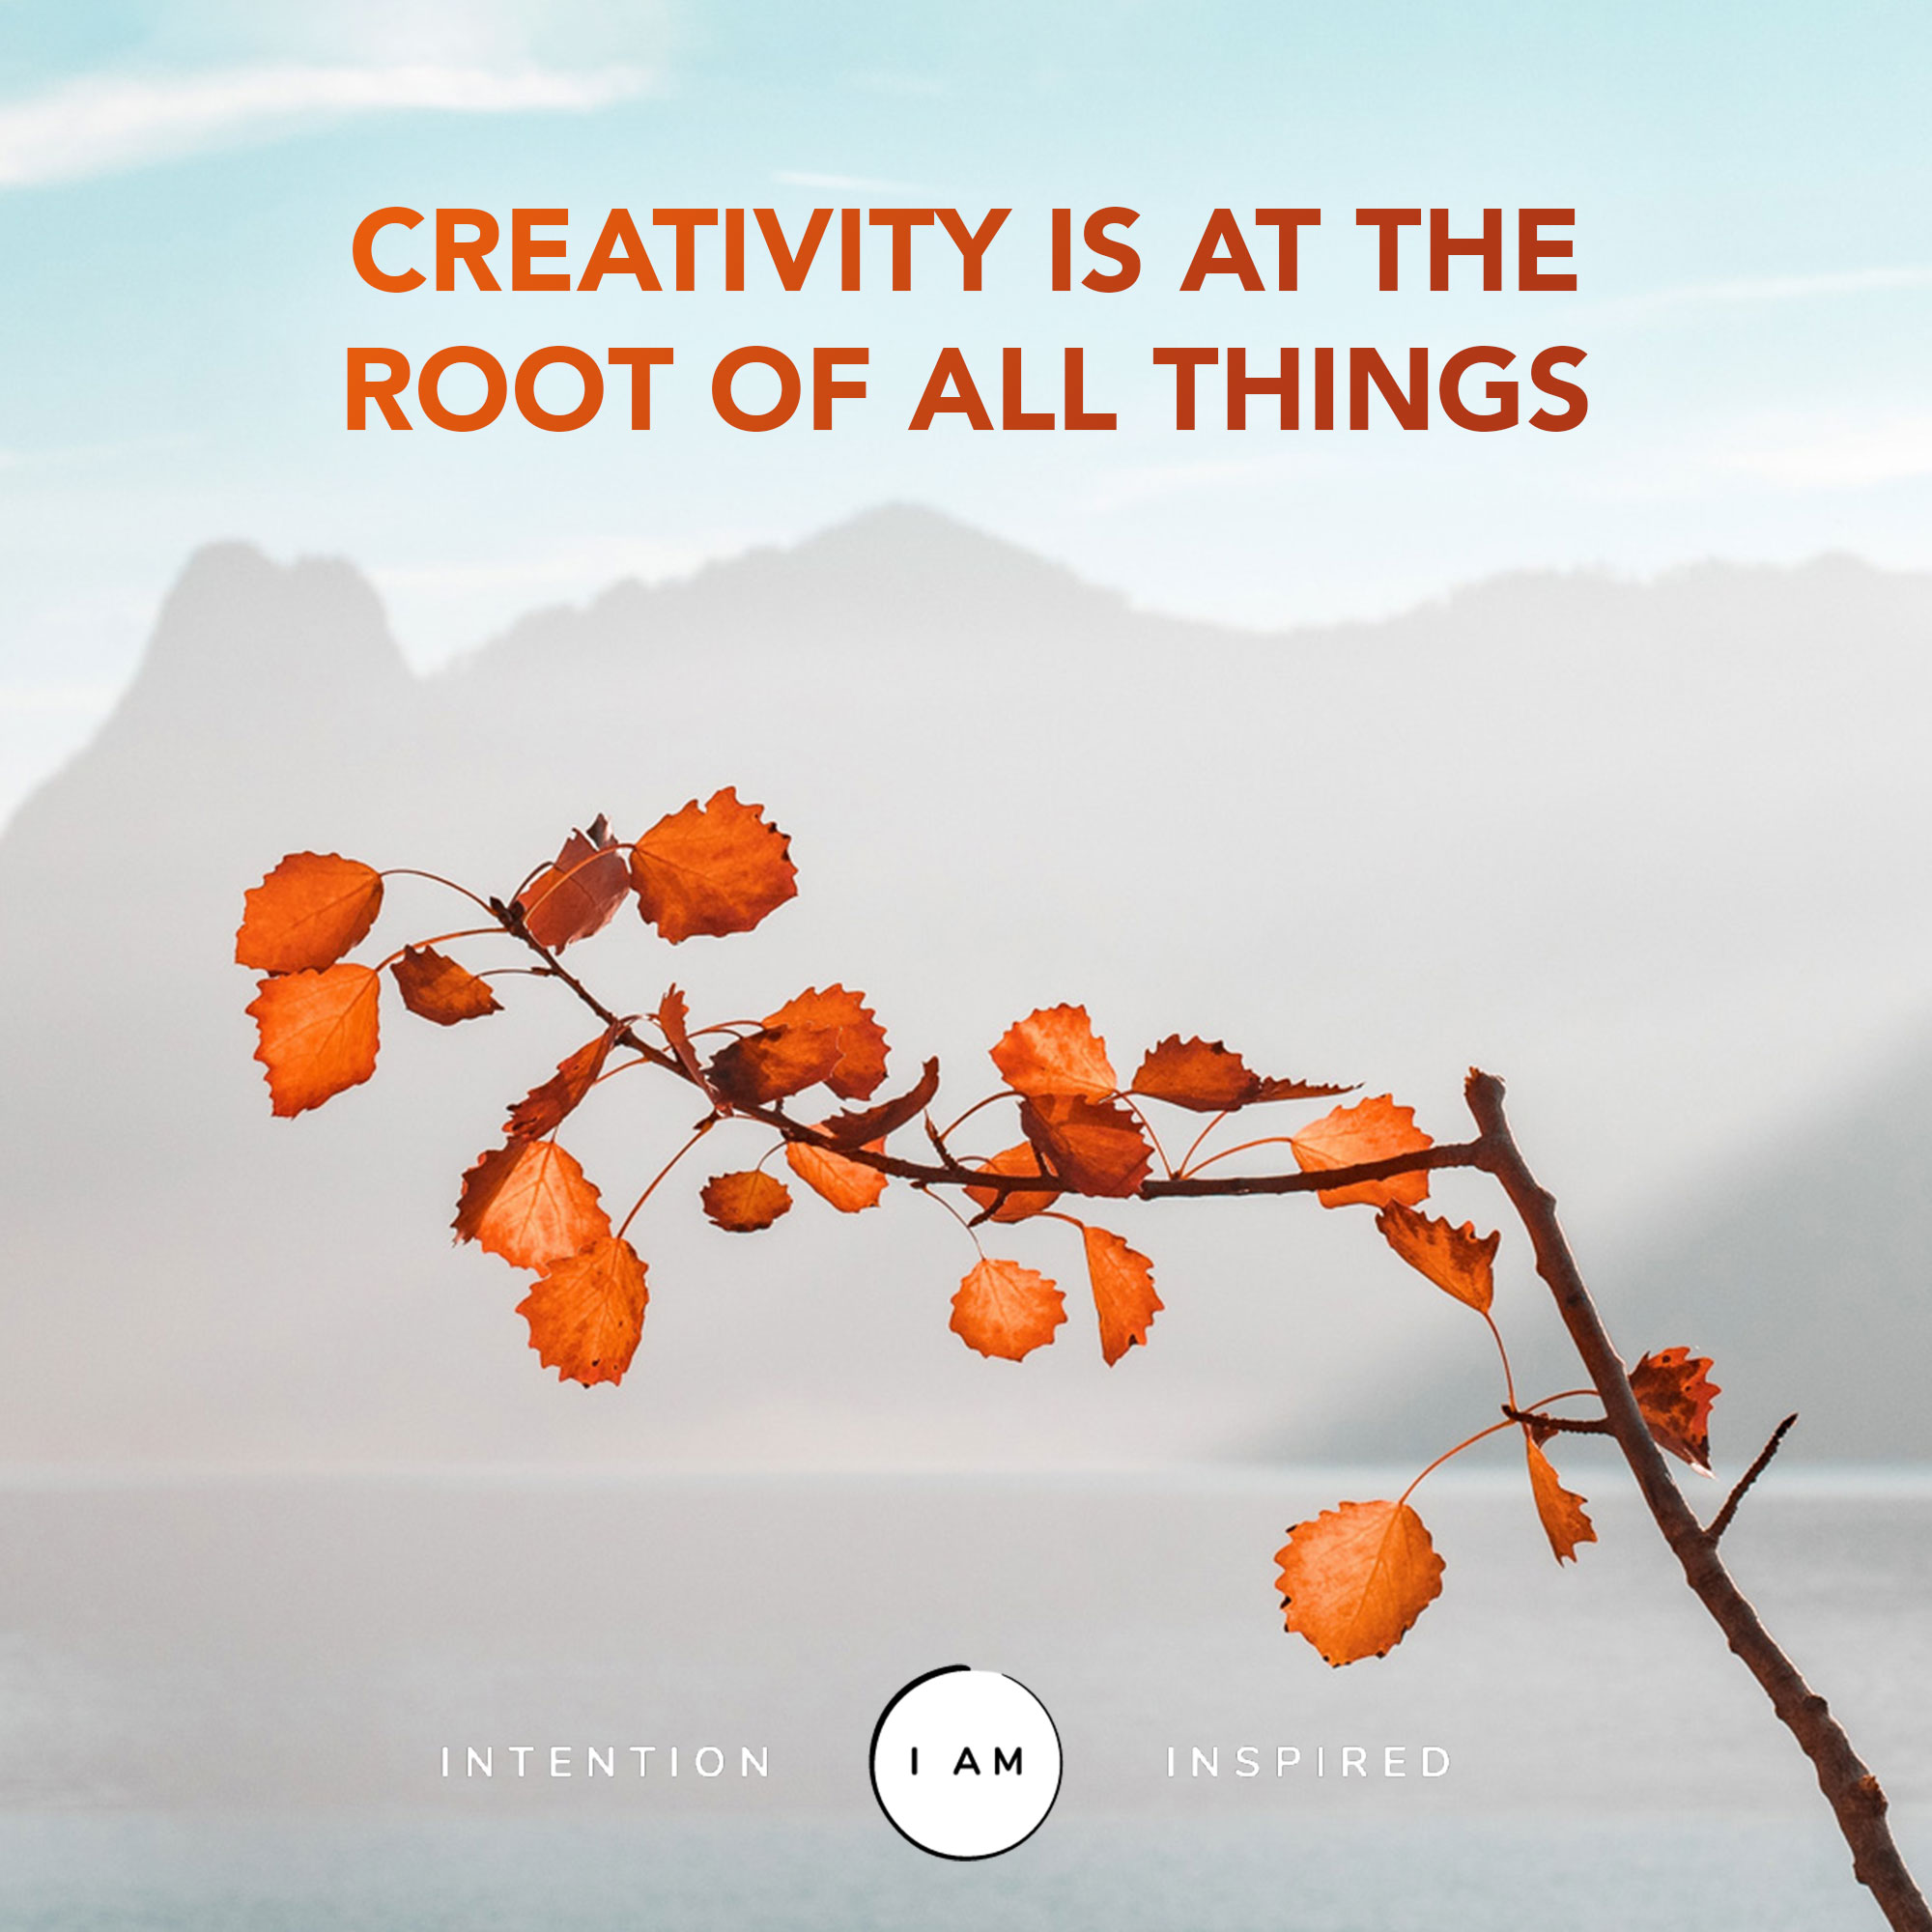 Creativity is at the root of all things.